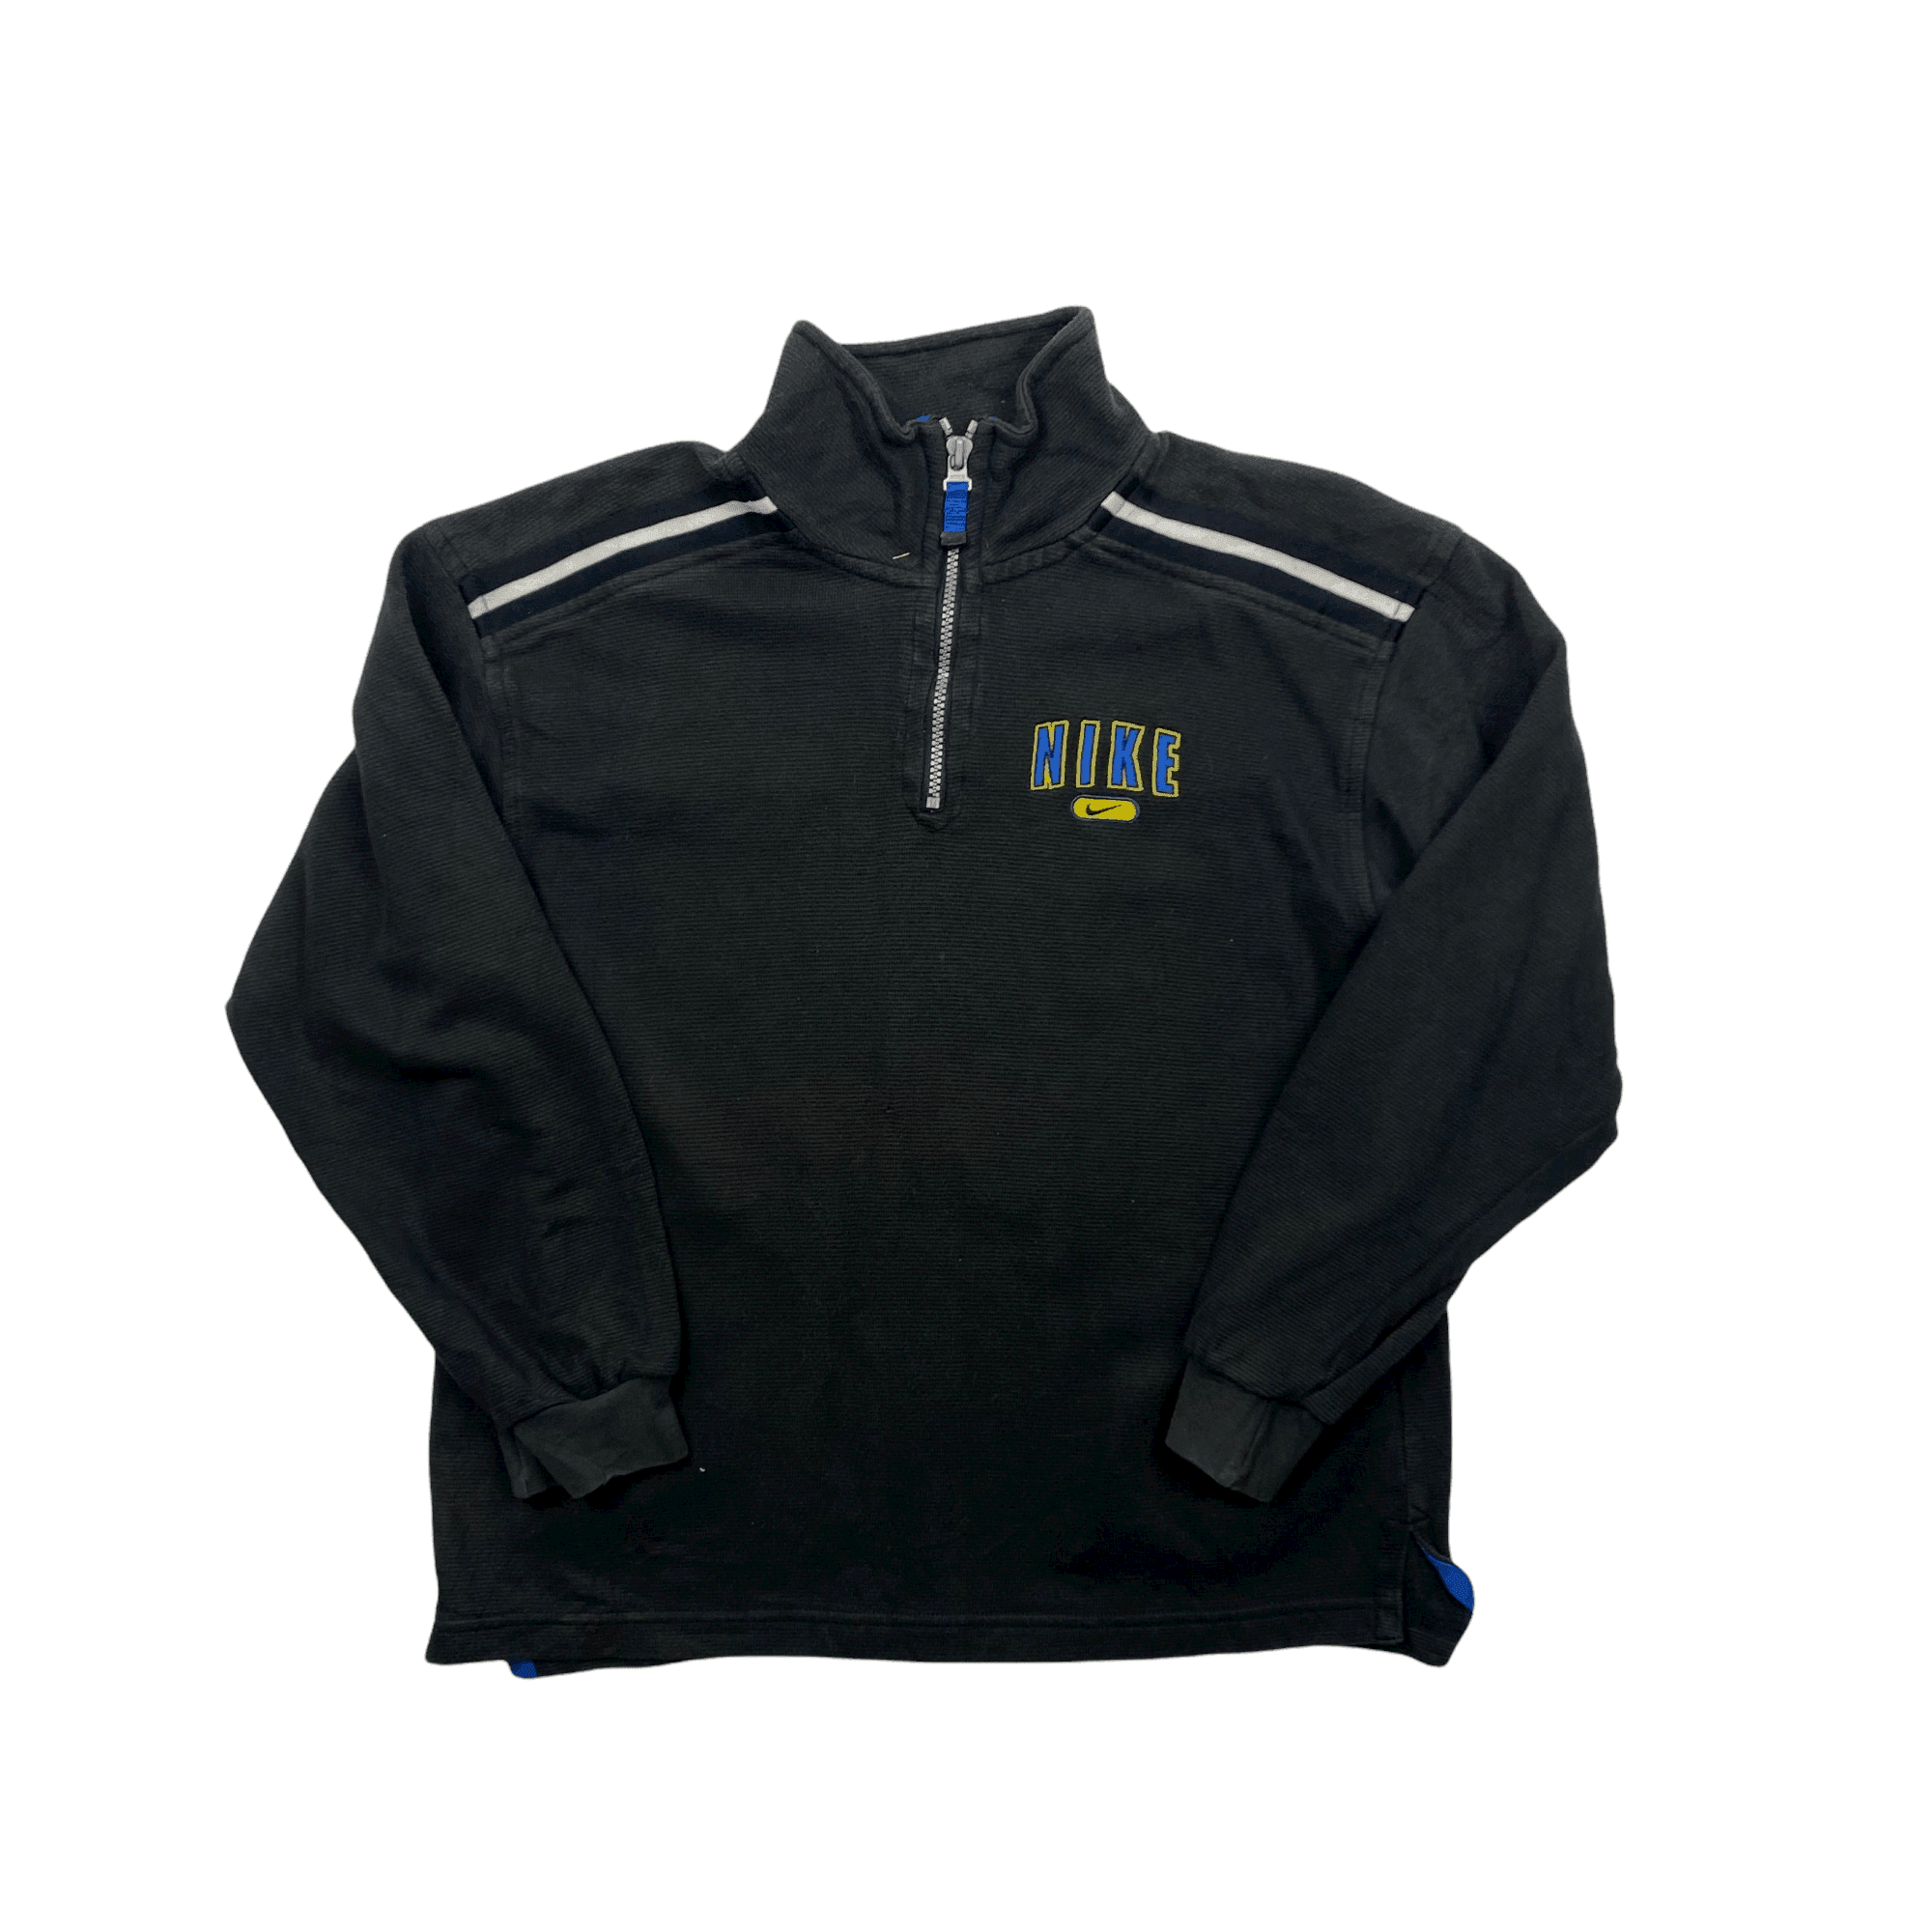 Vintage 90s Black Nike Spell-Out Quarter Zip Sweatshirt - Recommended Size - Small - The Streetwear Studio